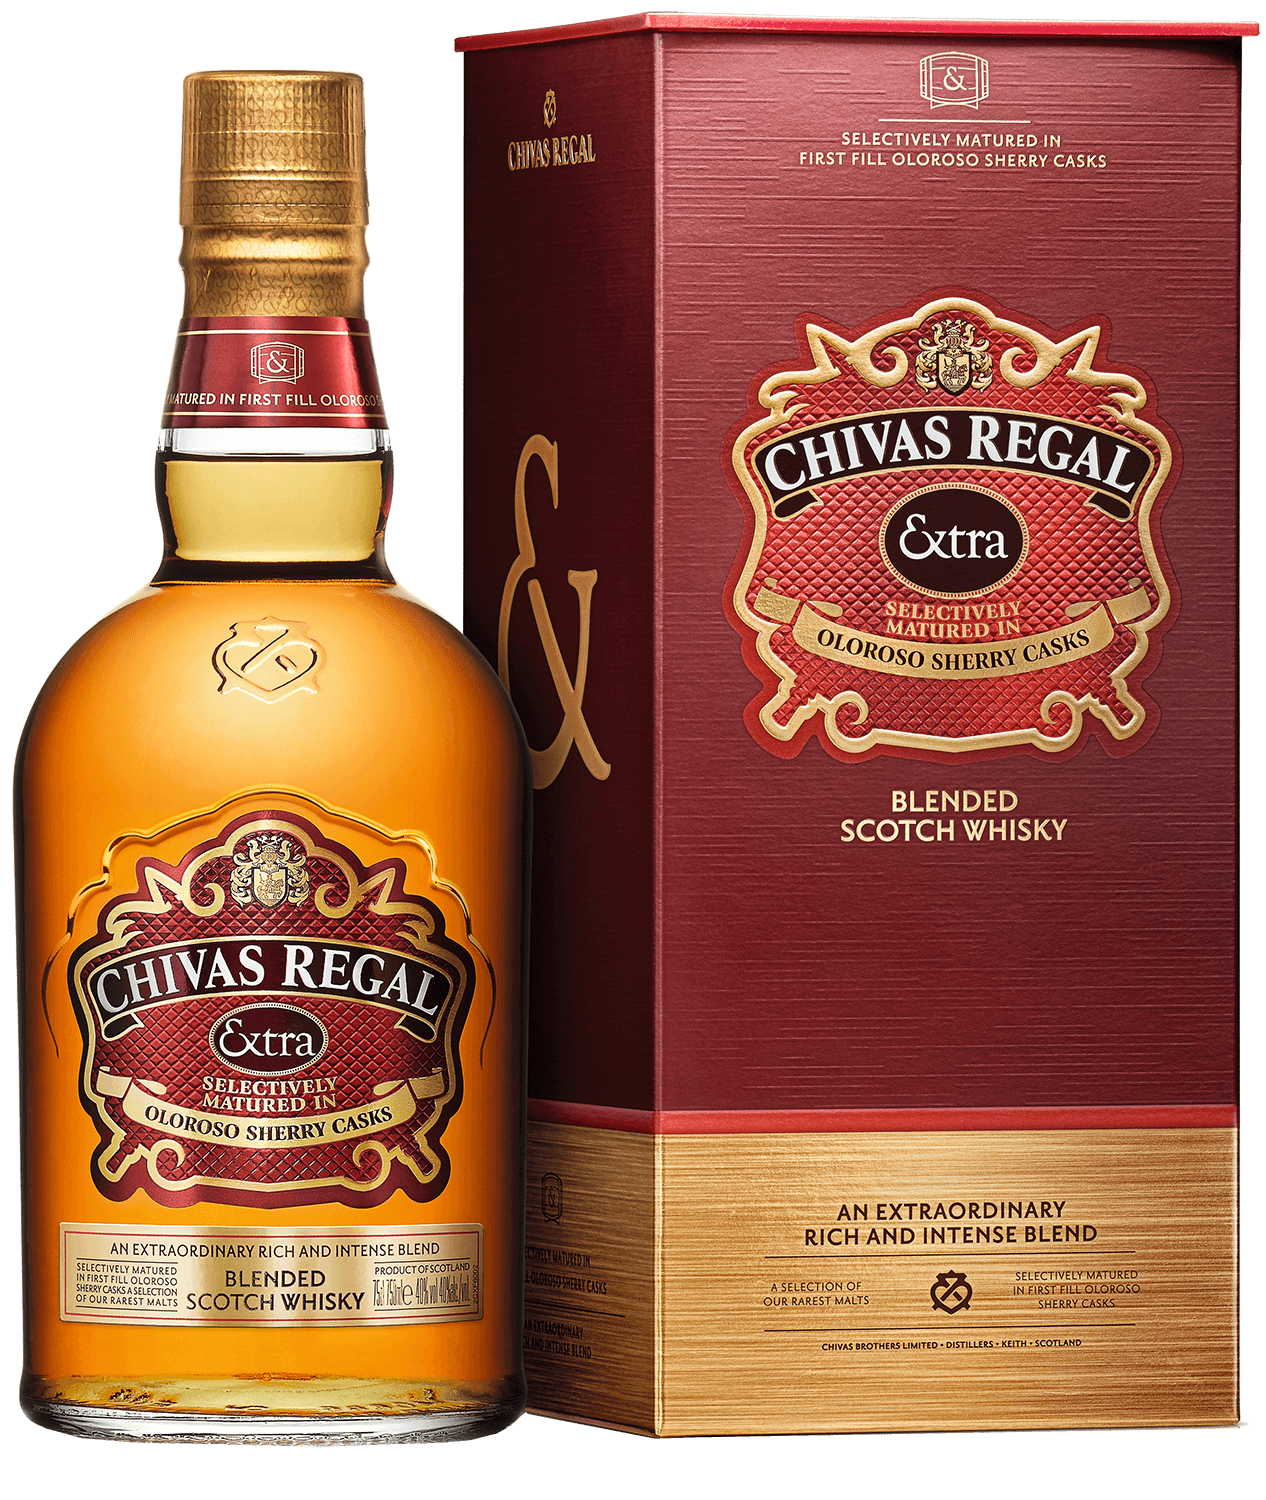 Chivas Regal Extra Blended Scotch Whisky (gift box) chivas regal extra oloroso sherry cask blended scotch whisky gift box